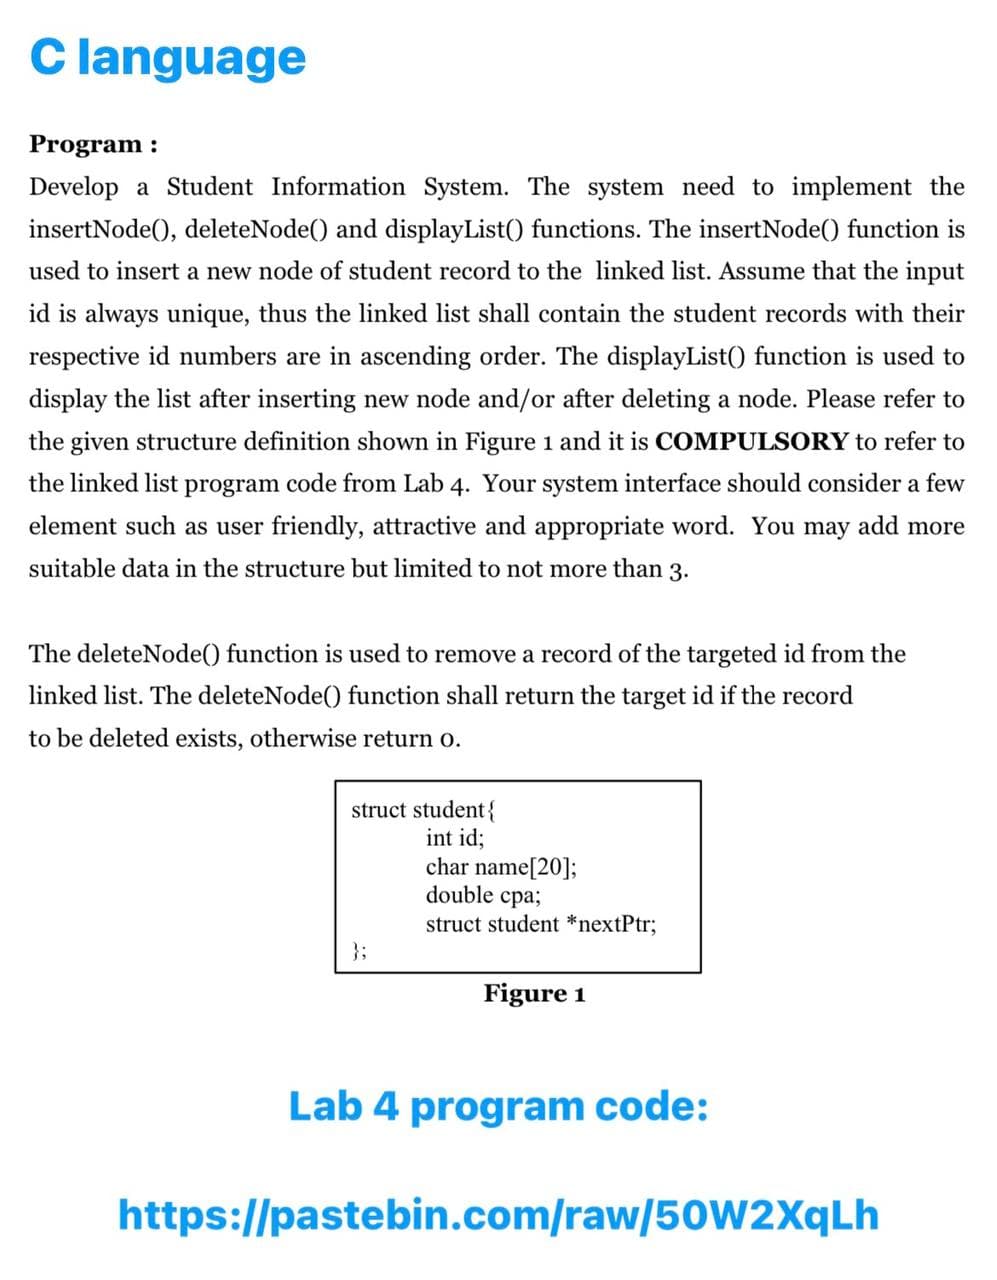 C language
Program :
Develop a Student Information System. The system need to implement the
insertNode(), deleteNode() and displayList() functions. The insertNode() function is
used to insert a new node of student record to the linked list. Assume that the input
id is always unique, thus the linked list shall contain the student records with their
respective id numbers are in ascending order. The displayList() function is used to
display the list after inserting new node and/or after deleting a node. Please refer to
the given structure definition shown in Figure 1 and it is COMPULSORY to refer to
the linked list program code from Lab 4. Your system interface should consider a few
element such as user friendly, attractive and appropriate word. You may add more
suitable data in the structure but limited to not more than 3.
The deleteNode() function is used to remove a record of the targeted id from the
linked list. The deleteNode() function shall return the target id if the record
to be deleted exists, otherwise return o.
struct student{
int id;
char name[20];
double cpa;
struct student *nextPtr3;
};
Figure 1
Lab 4 program code:
https://pastebin.com/raw/50W2XqLh
